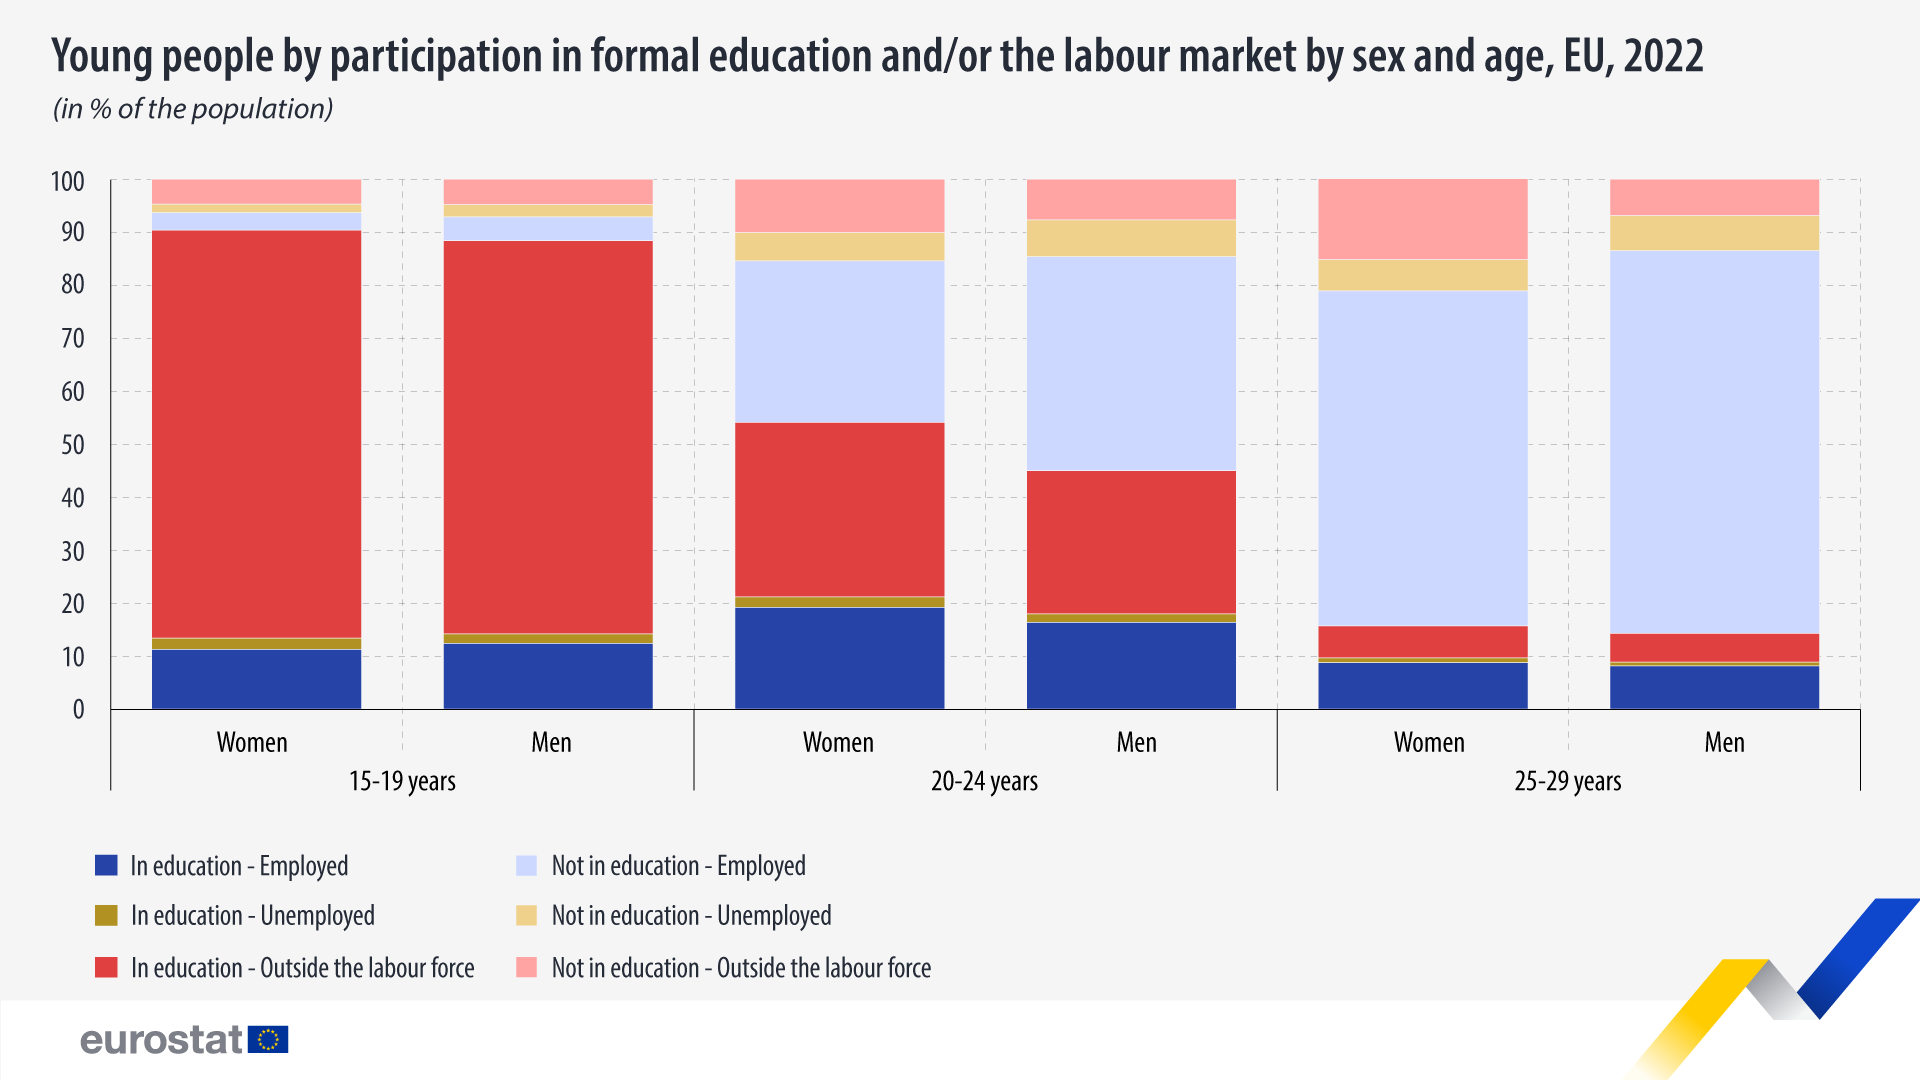 Bar chart: Young people by participation in formal education and/or the labour market, sex and age, EU, 2022